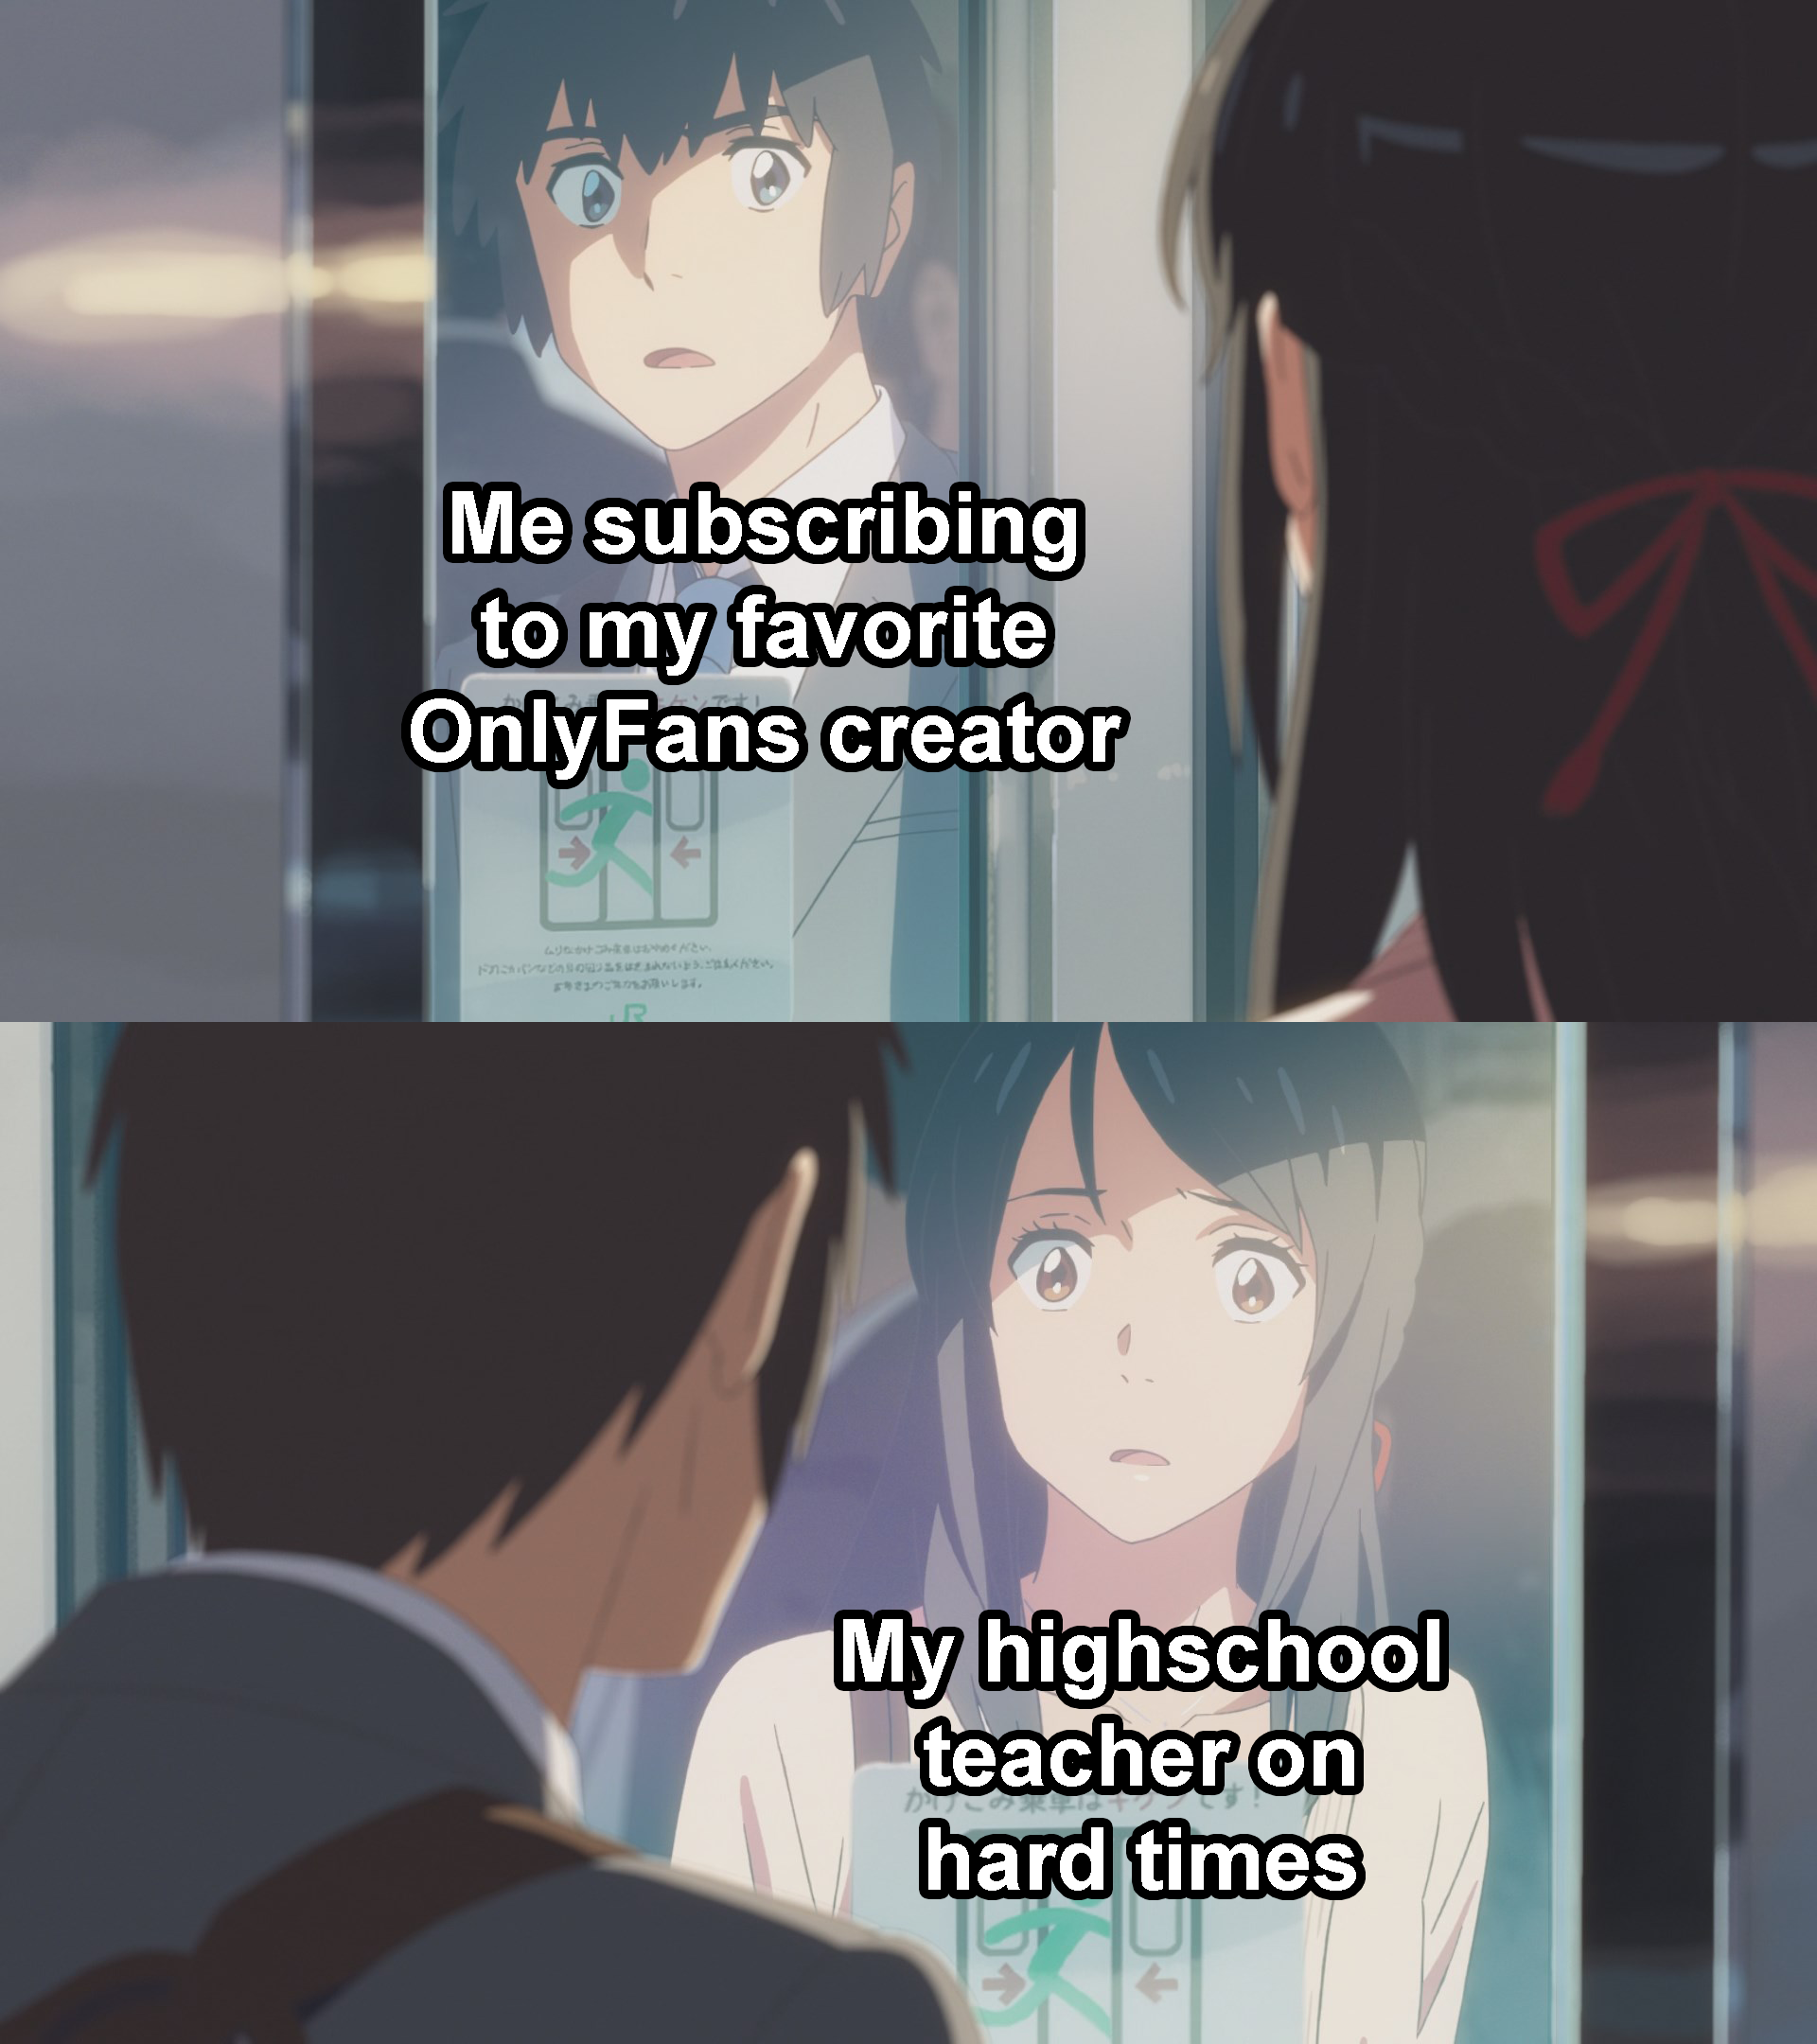 funny memes - cartoon - Me subscribing to my favorite OnlyFans creator My highschool teacher on hard times 9